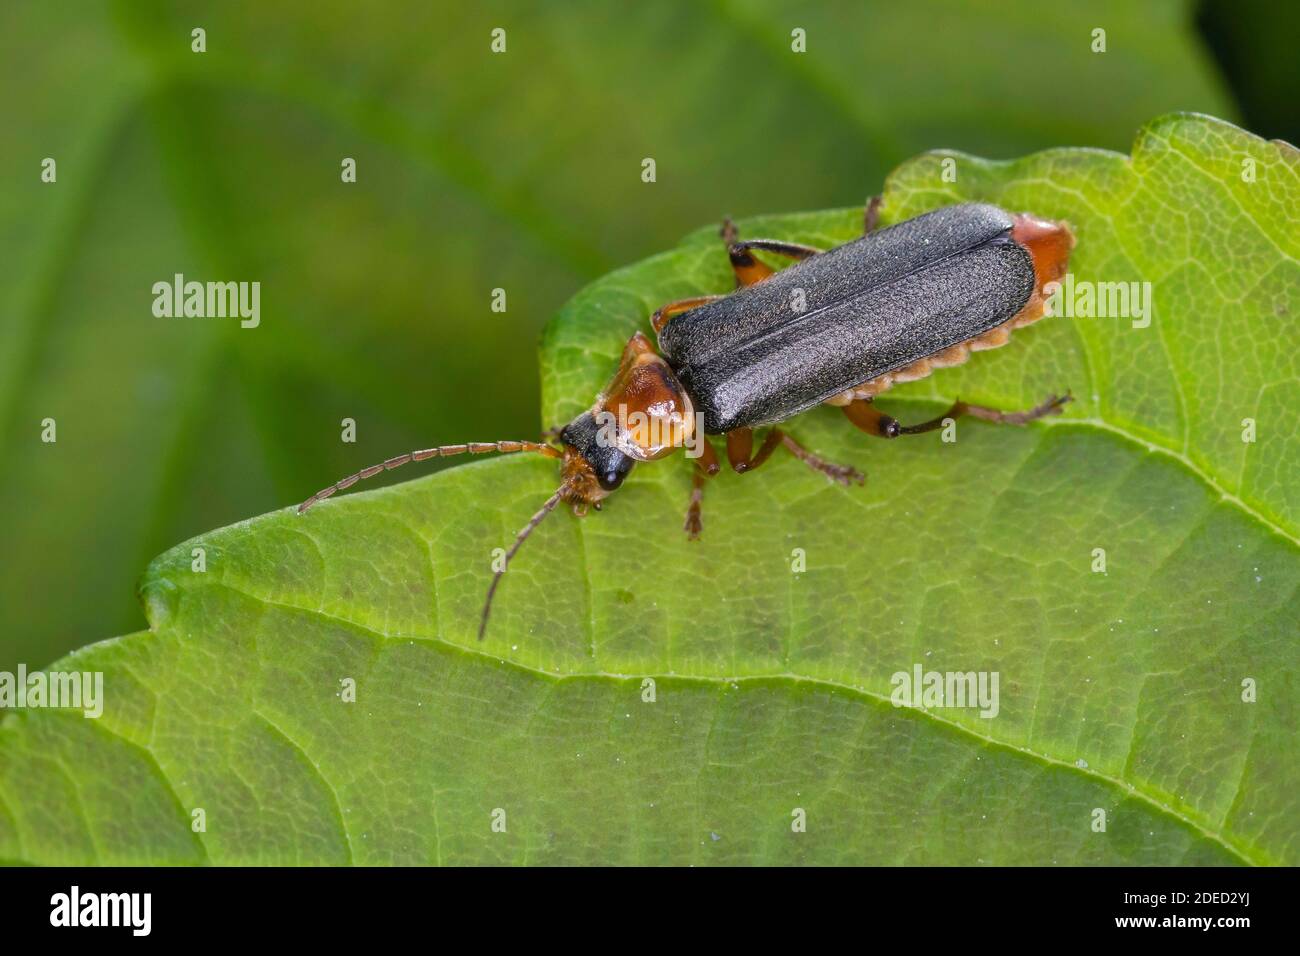 Soldier beetle (Cantharis nigricans), sitting on a leaf, dorsal view, Germany Stock Photo